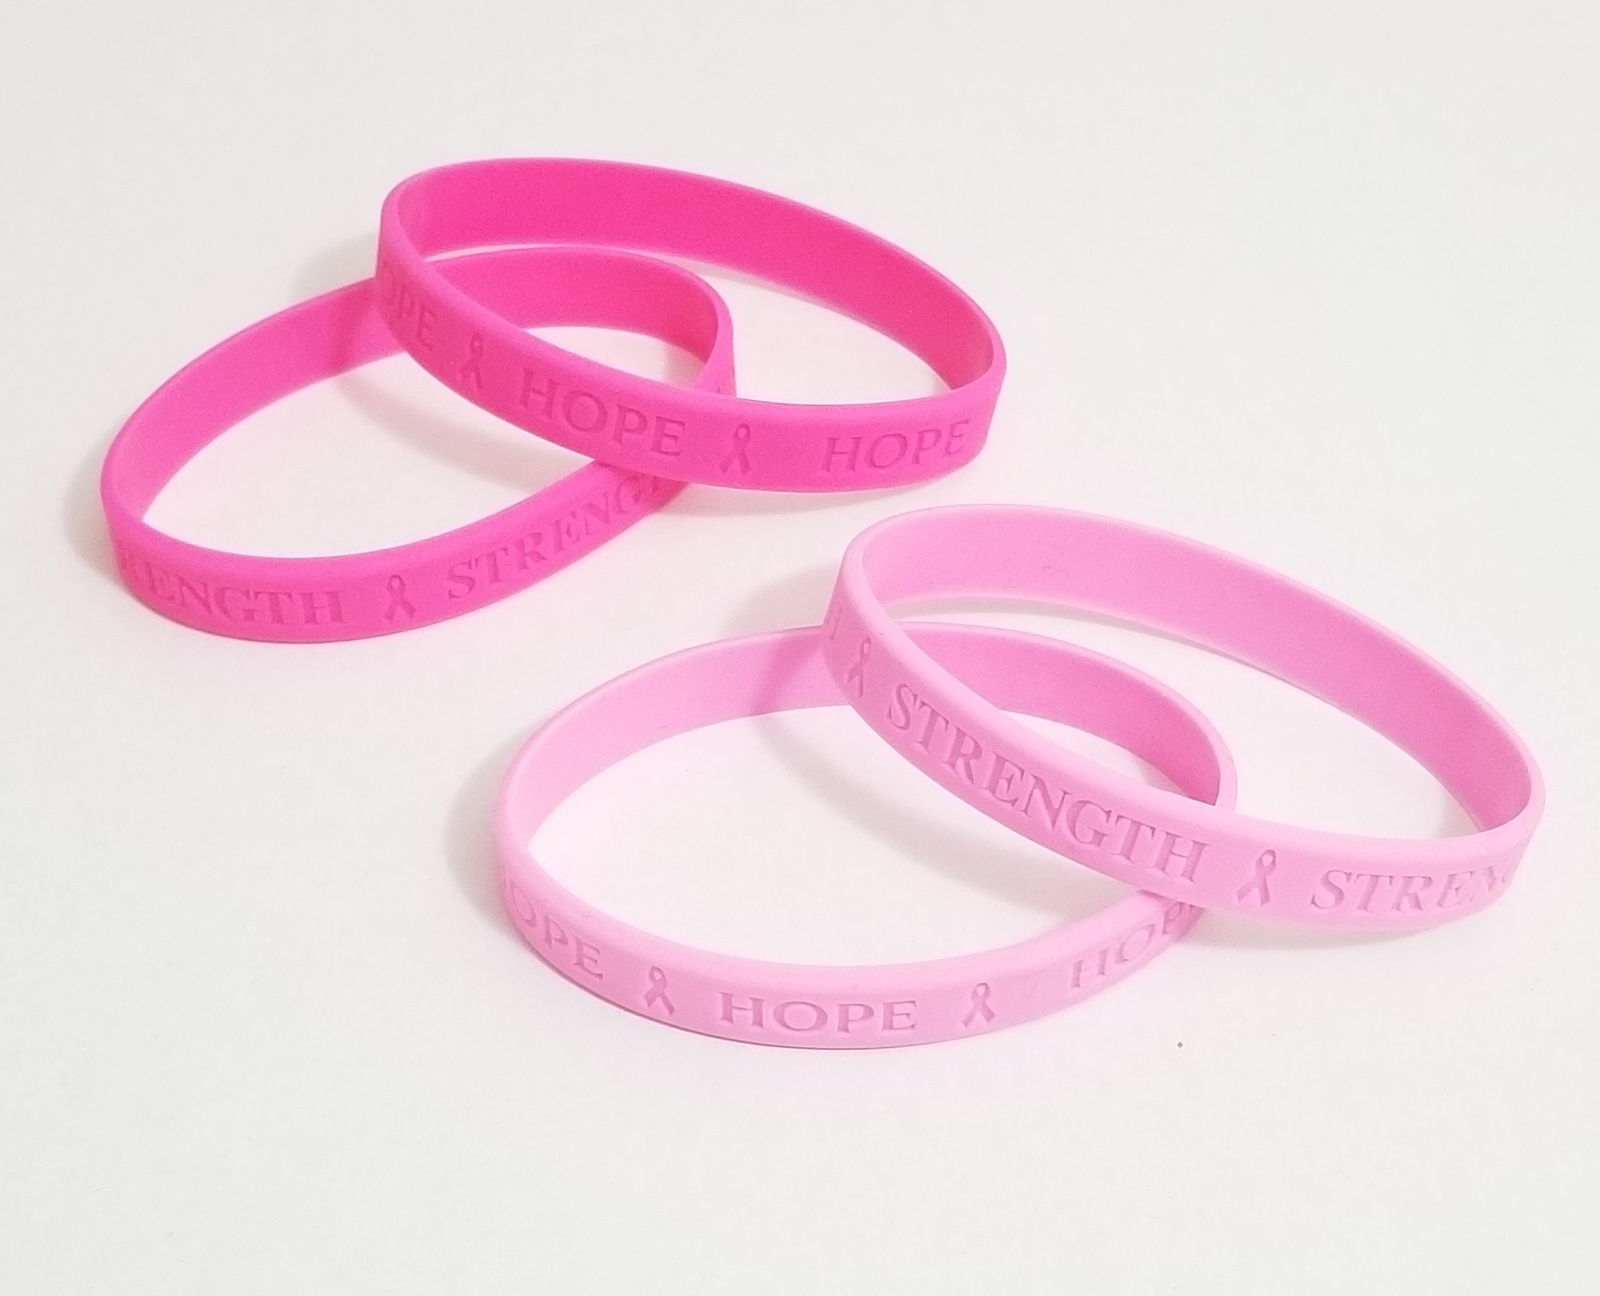 Breast cancer awareness silicone band set